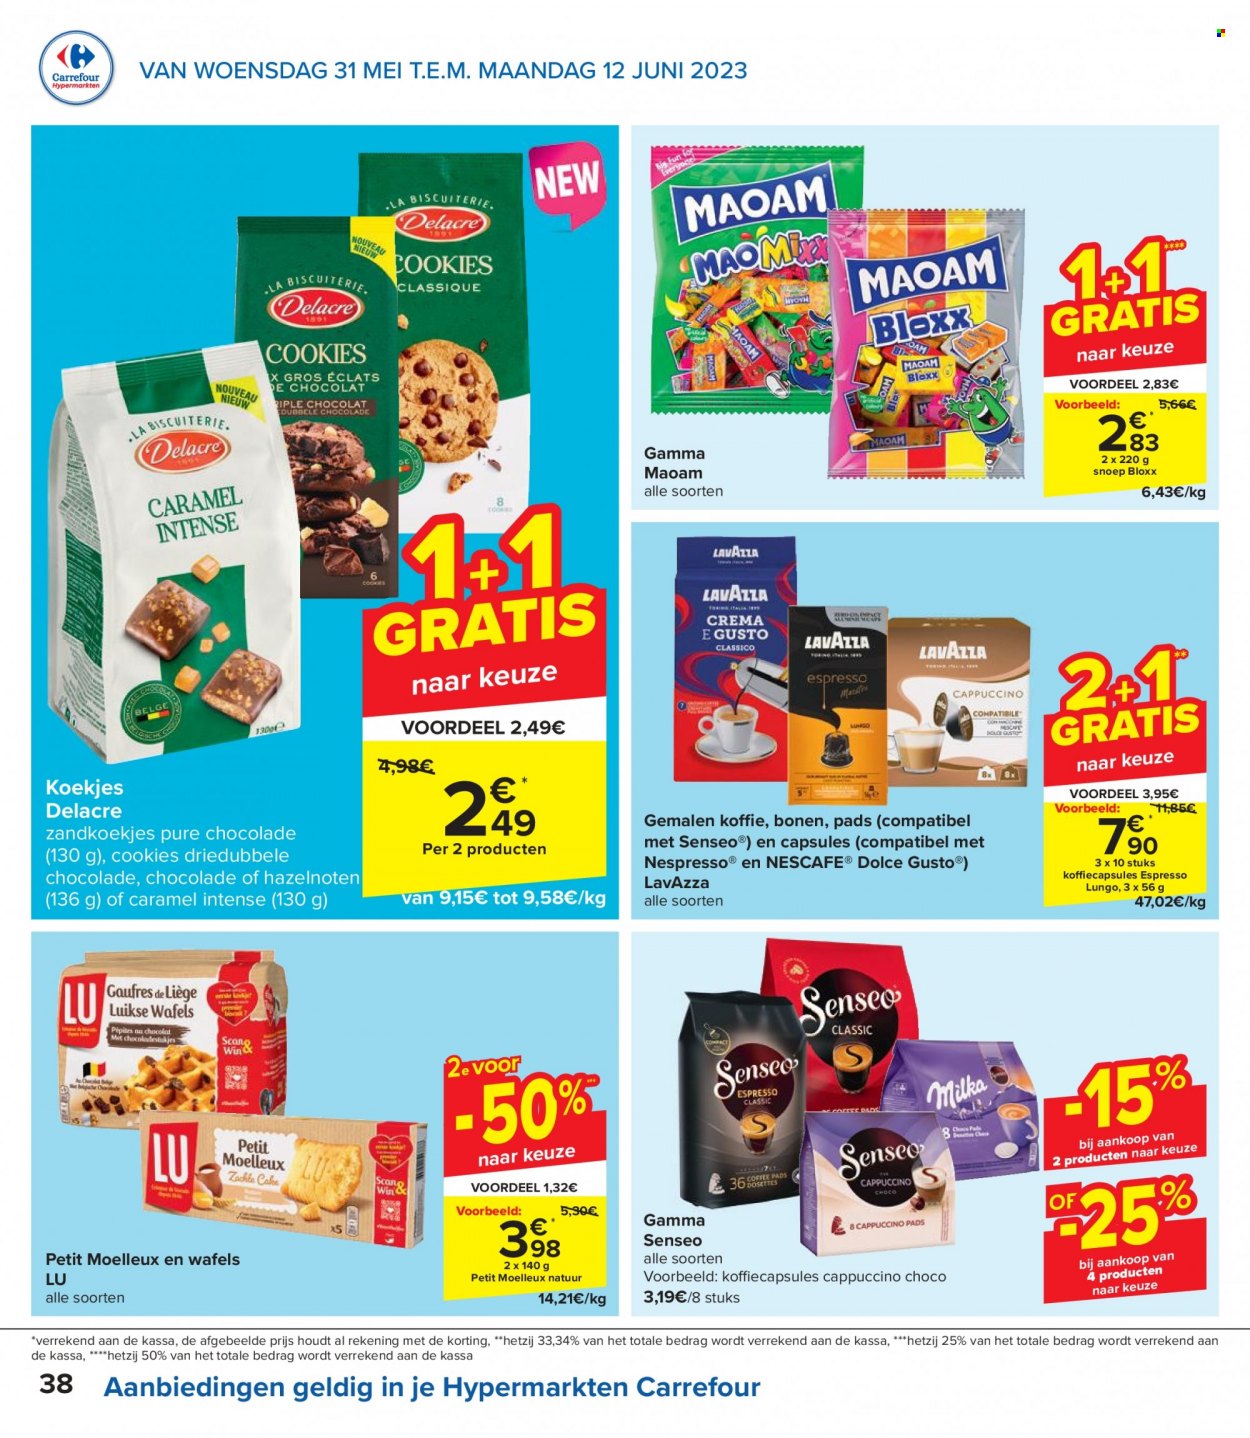 Catalogue Carrefour hypermarkt - 31.5.2023 - 12.6.2023. Page 38.